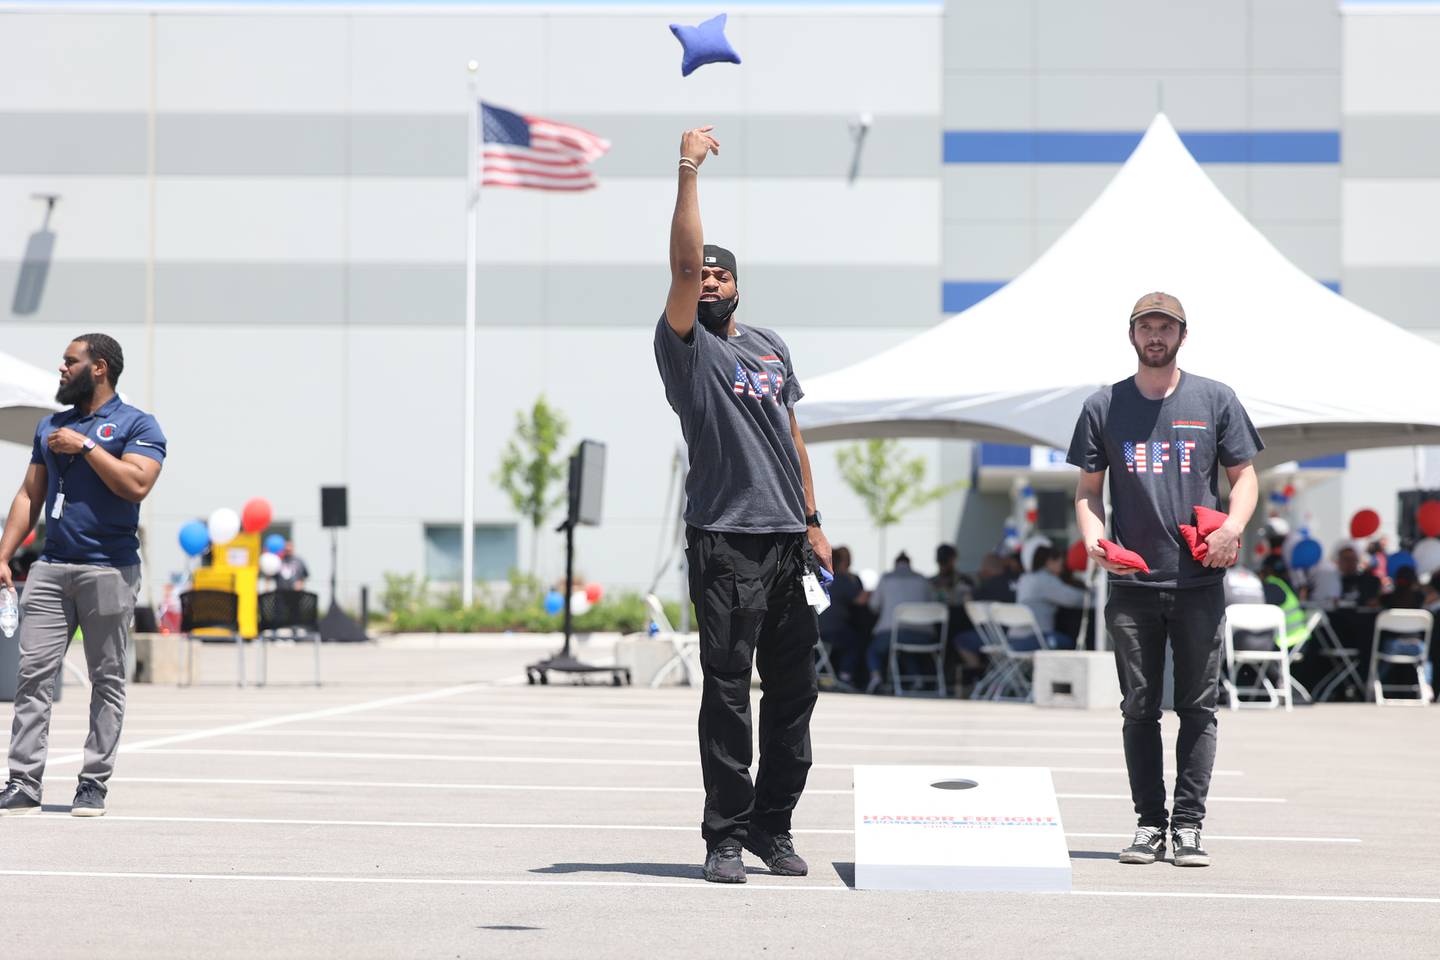 Harbor Freight equipment operator Kendall Coleman tosses bags with co-workers at a ribbon cutting ceremony. Harbor Freight opened a new 1.6 million square-foot distribution center in Joliet that is expected to bring 800 new jobs to the area. Thursday, June 9, 2022 in Joliet.